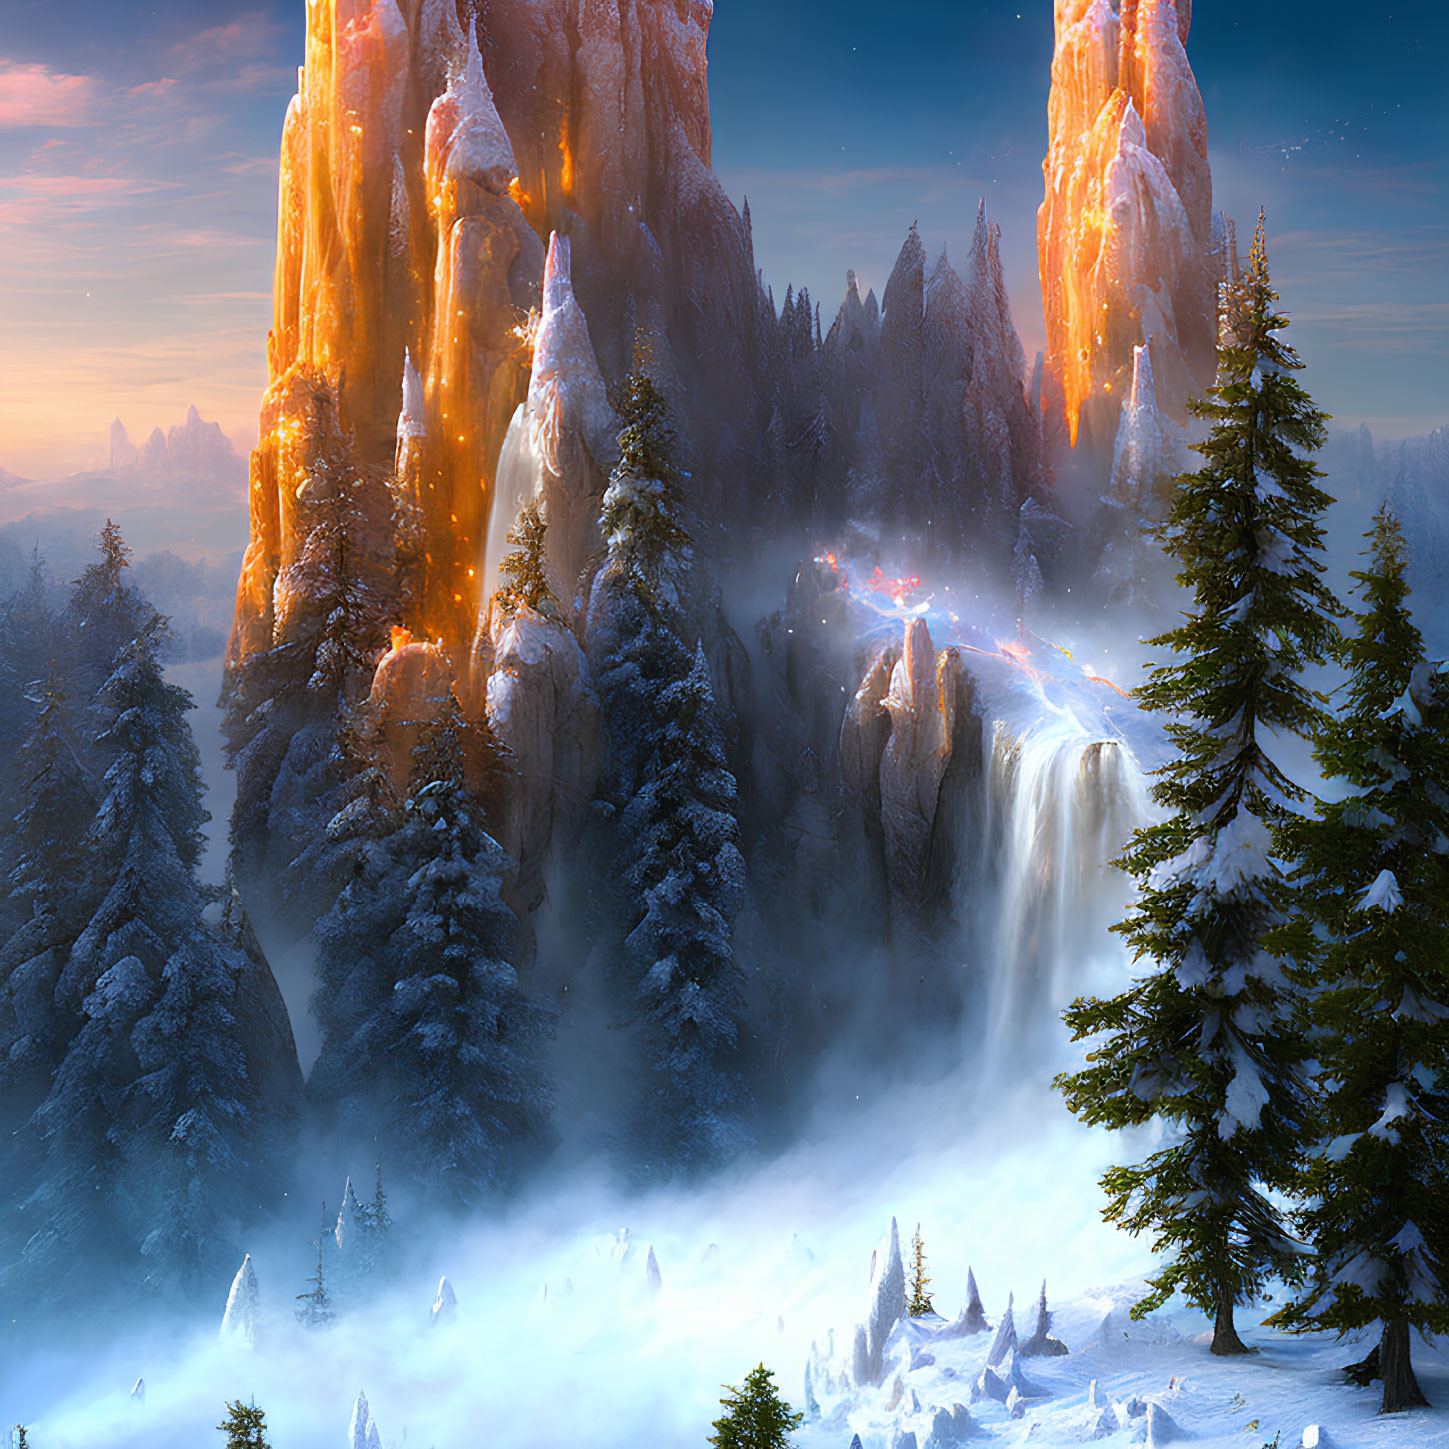 Snow-covered cliffs, waterfall, pine trees in winter scene